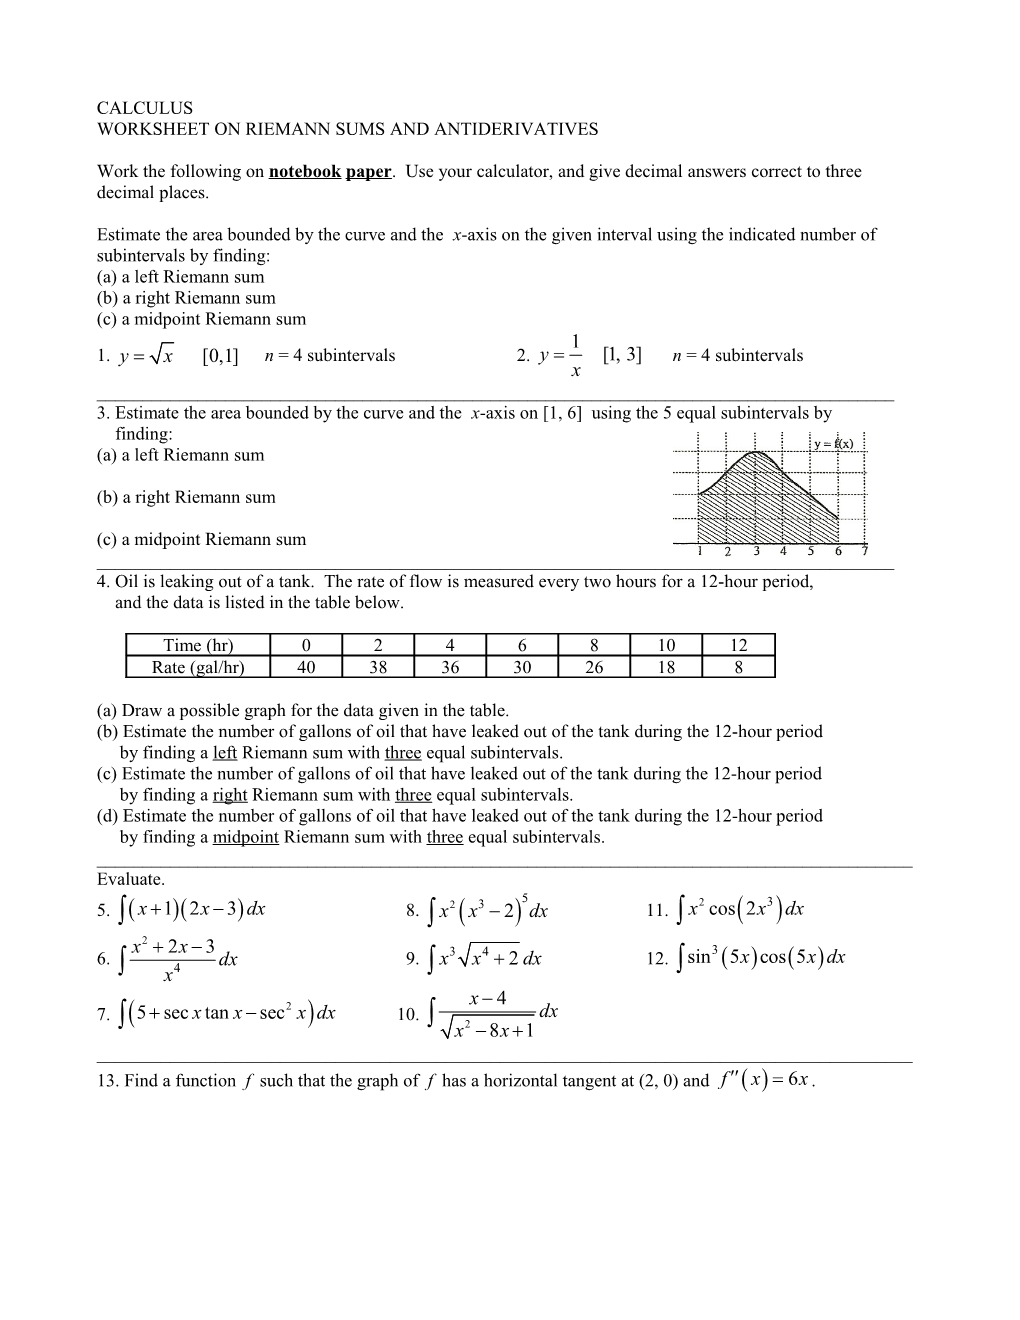 Worksheet on Riemann Sums and Antiderivatives